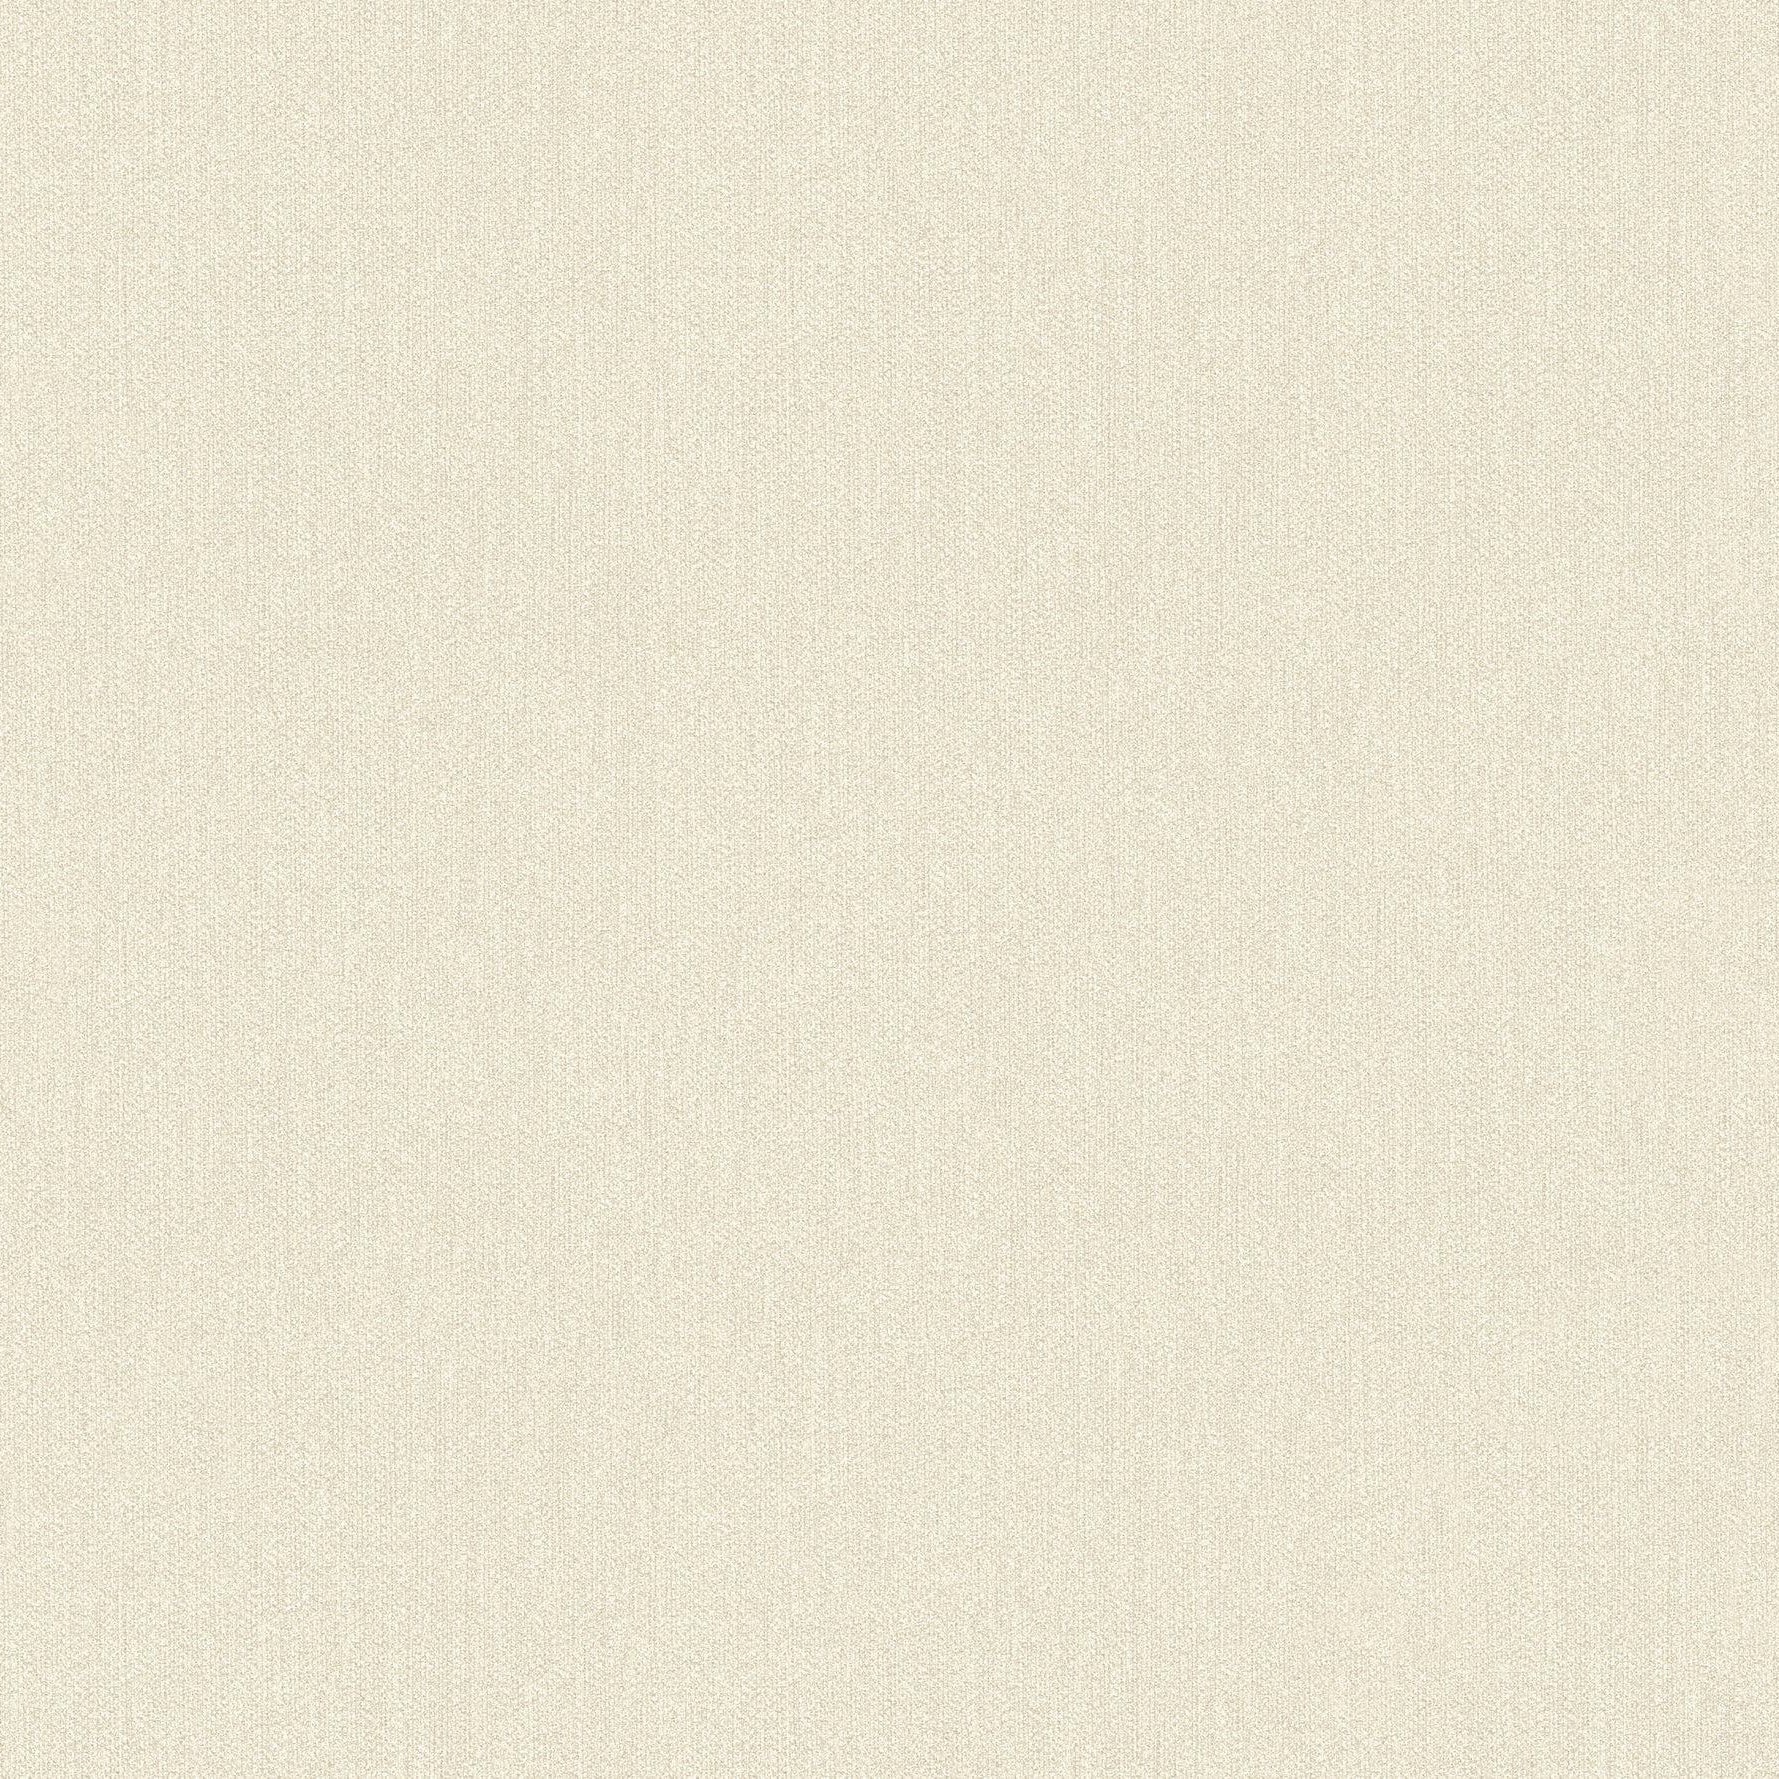 Looking for 2971-86304 Dimensions Sydney Taupe Faux Linen Taupe A-Street Prints Wallpaper